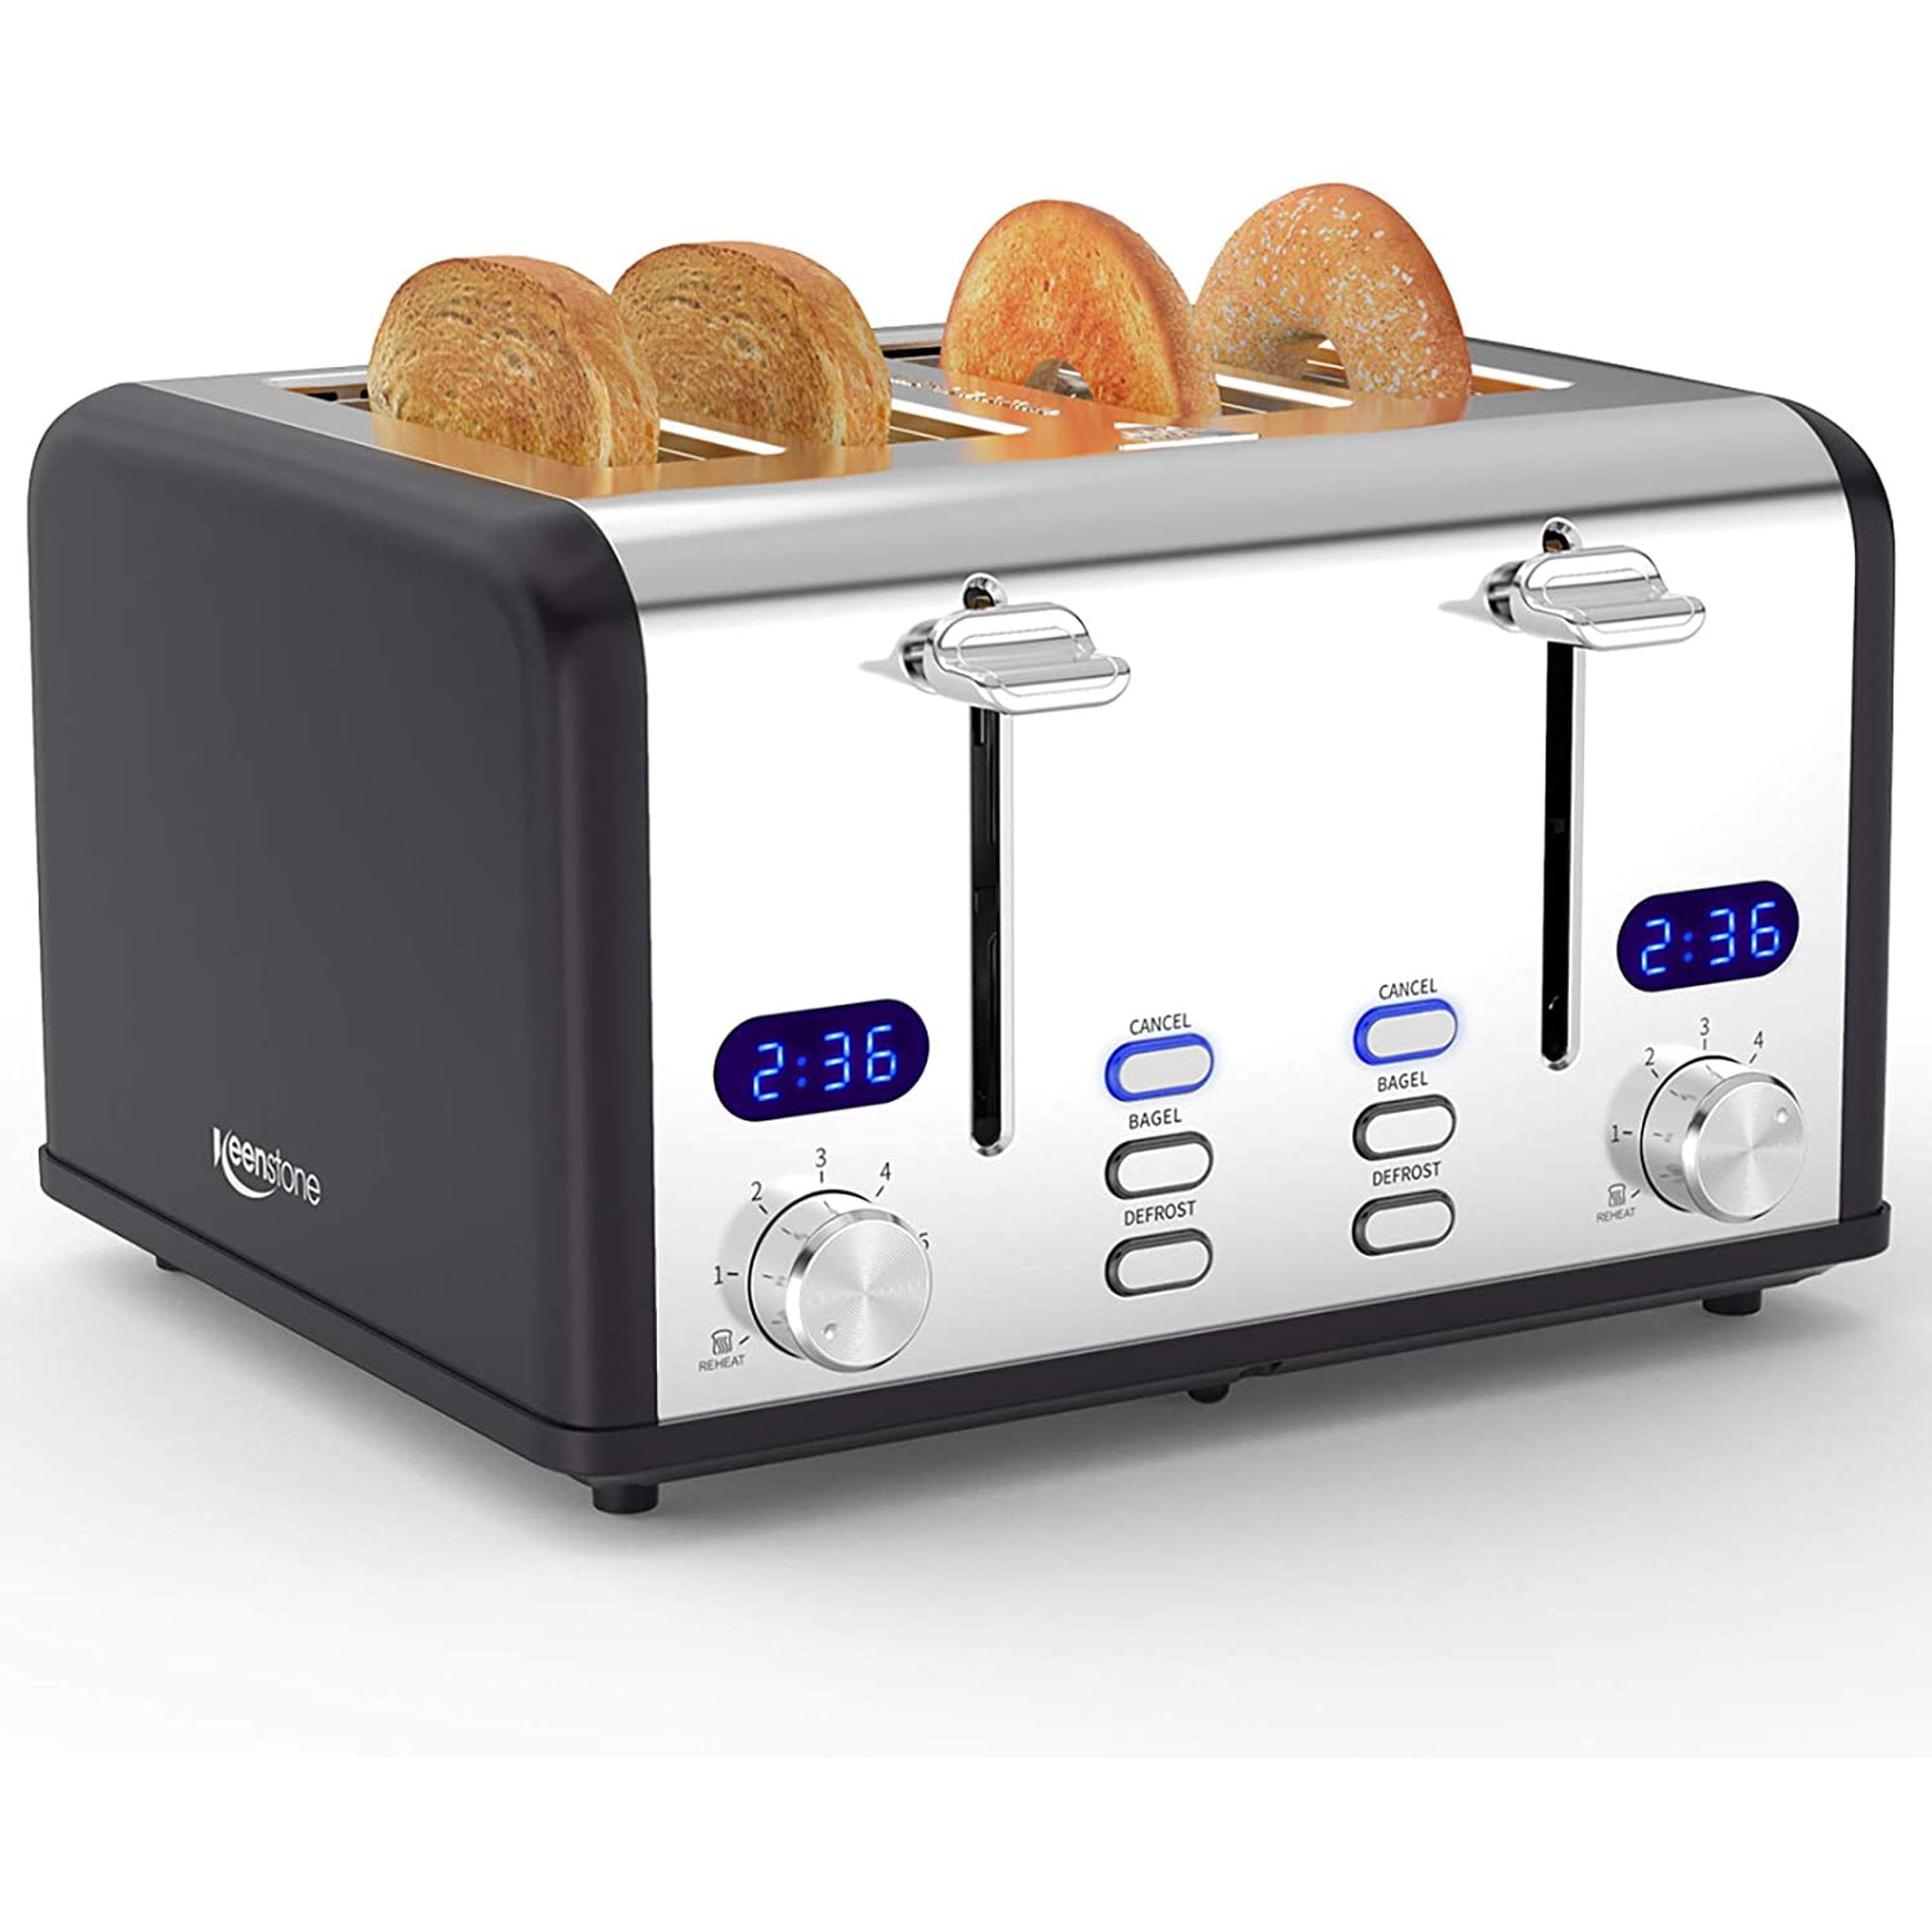 4 Slice Toaster Toaster Prime Rated Toaster Stainless Steel Digital Countdown 